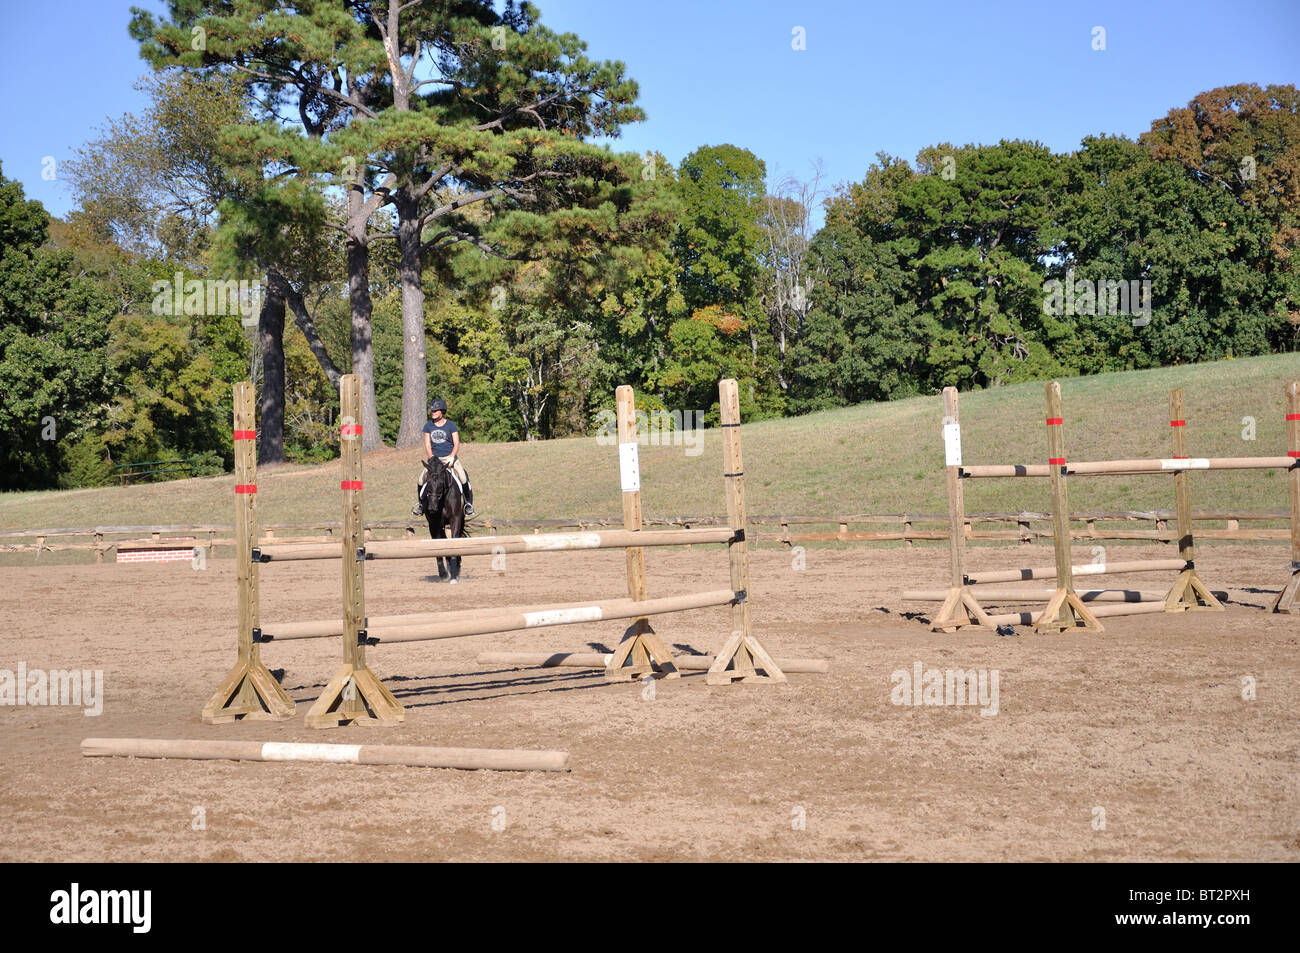 Equine horse jumps Stock Photo